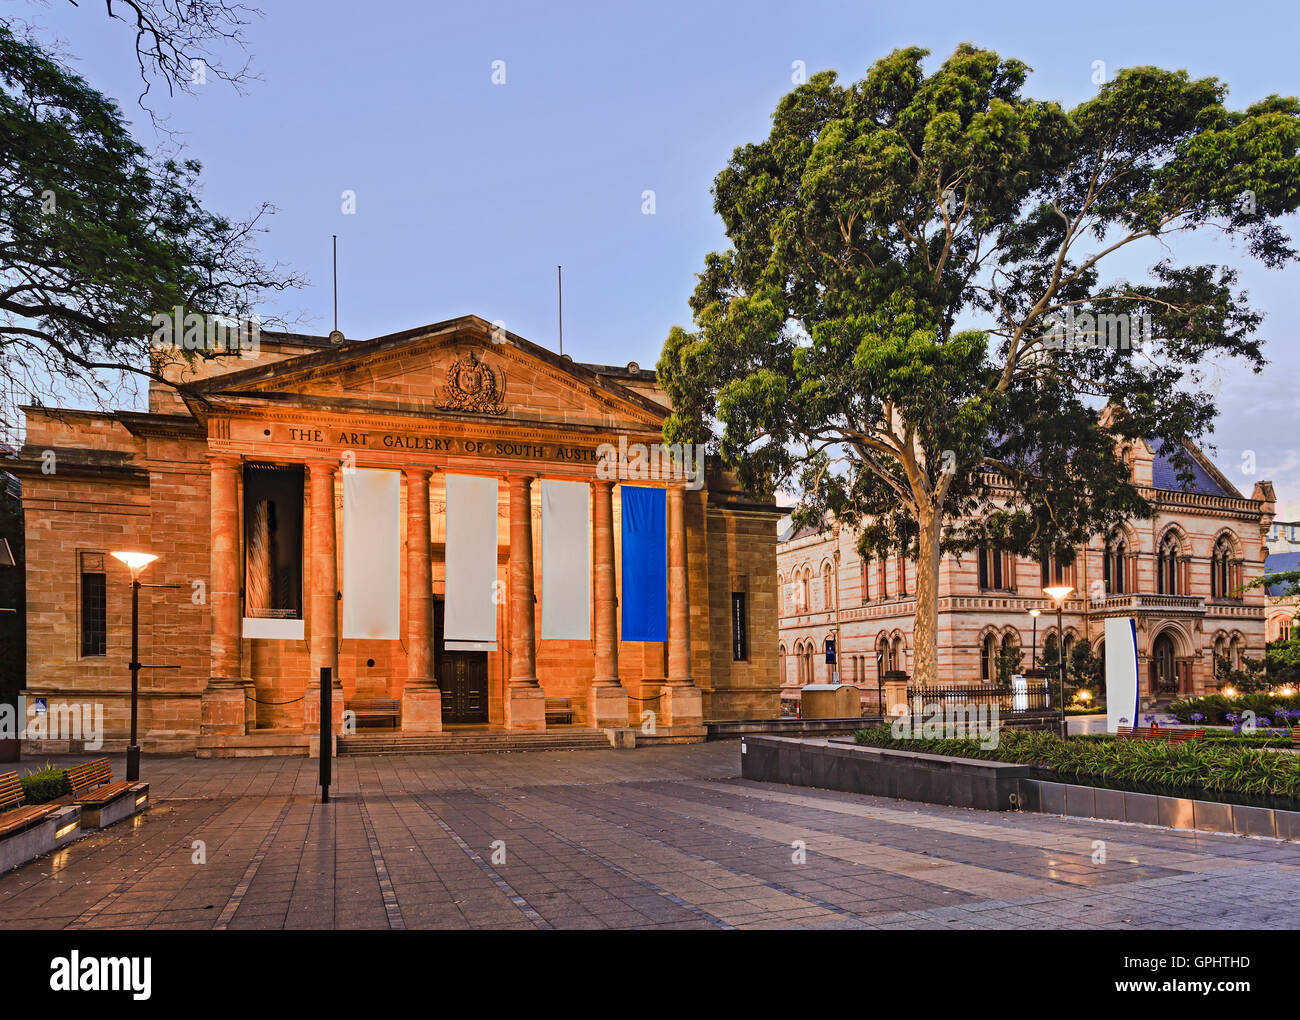 Public services building with free entry - the art gallery of South Australia. Facade and entrance to the gallery at sunset. Stock Photo